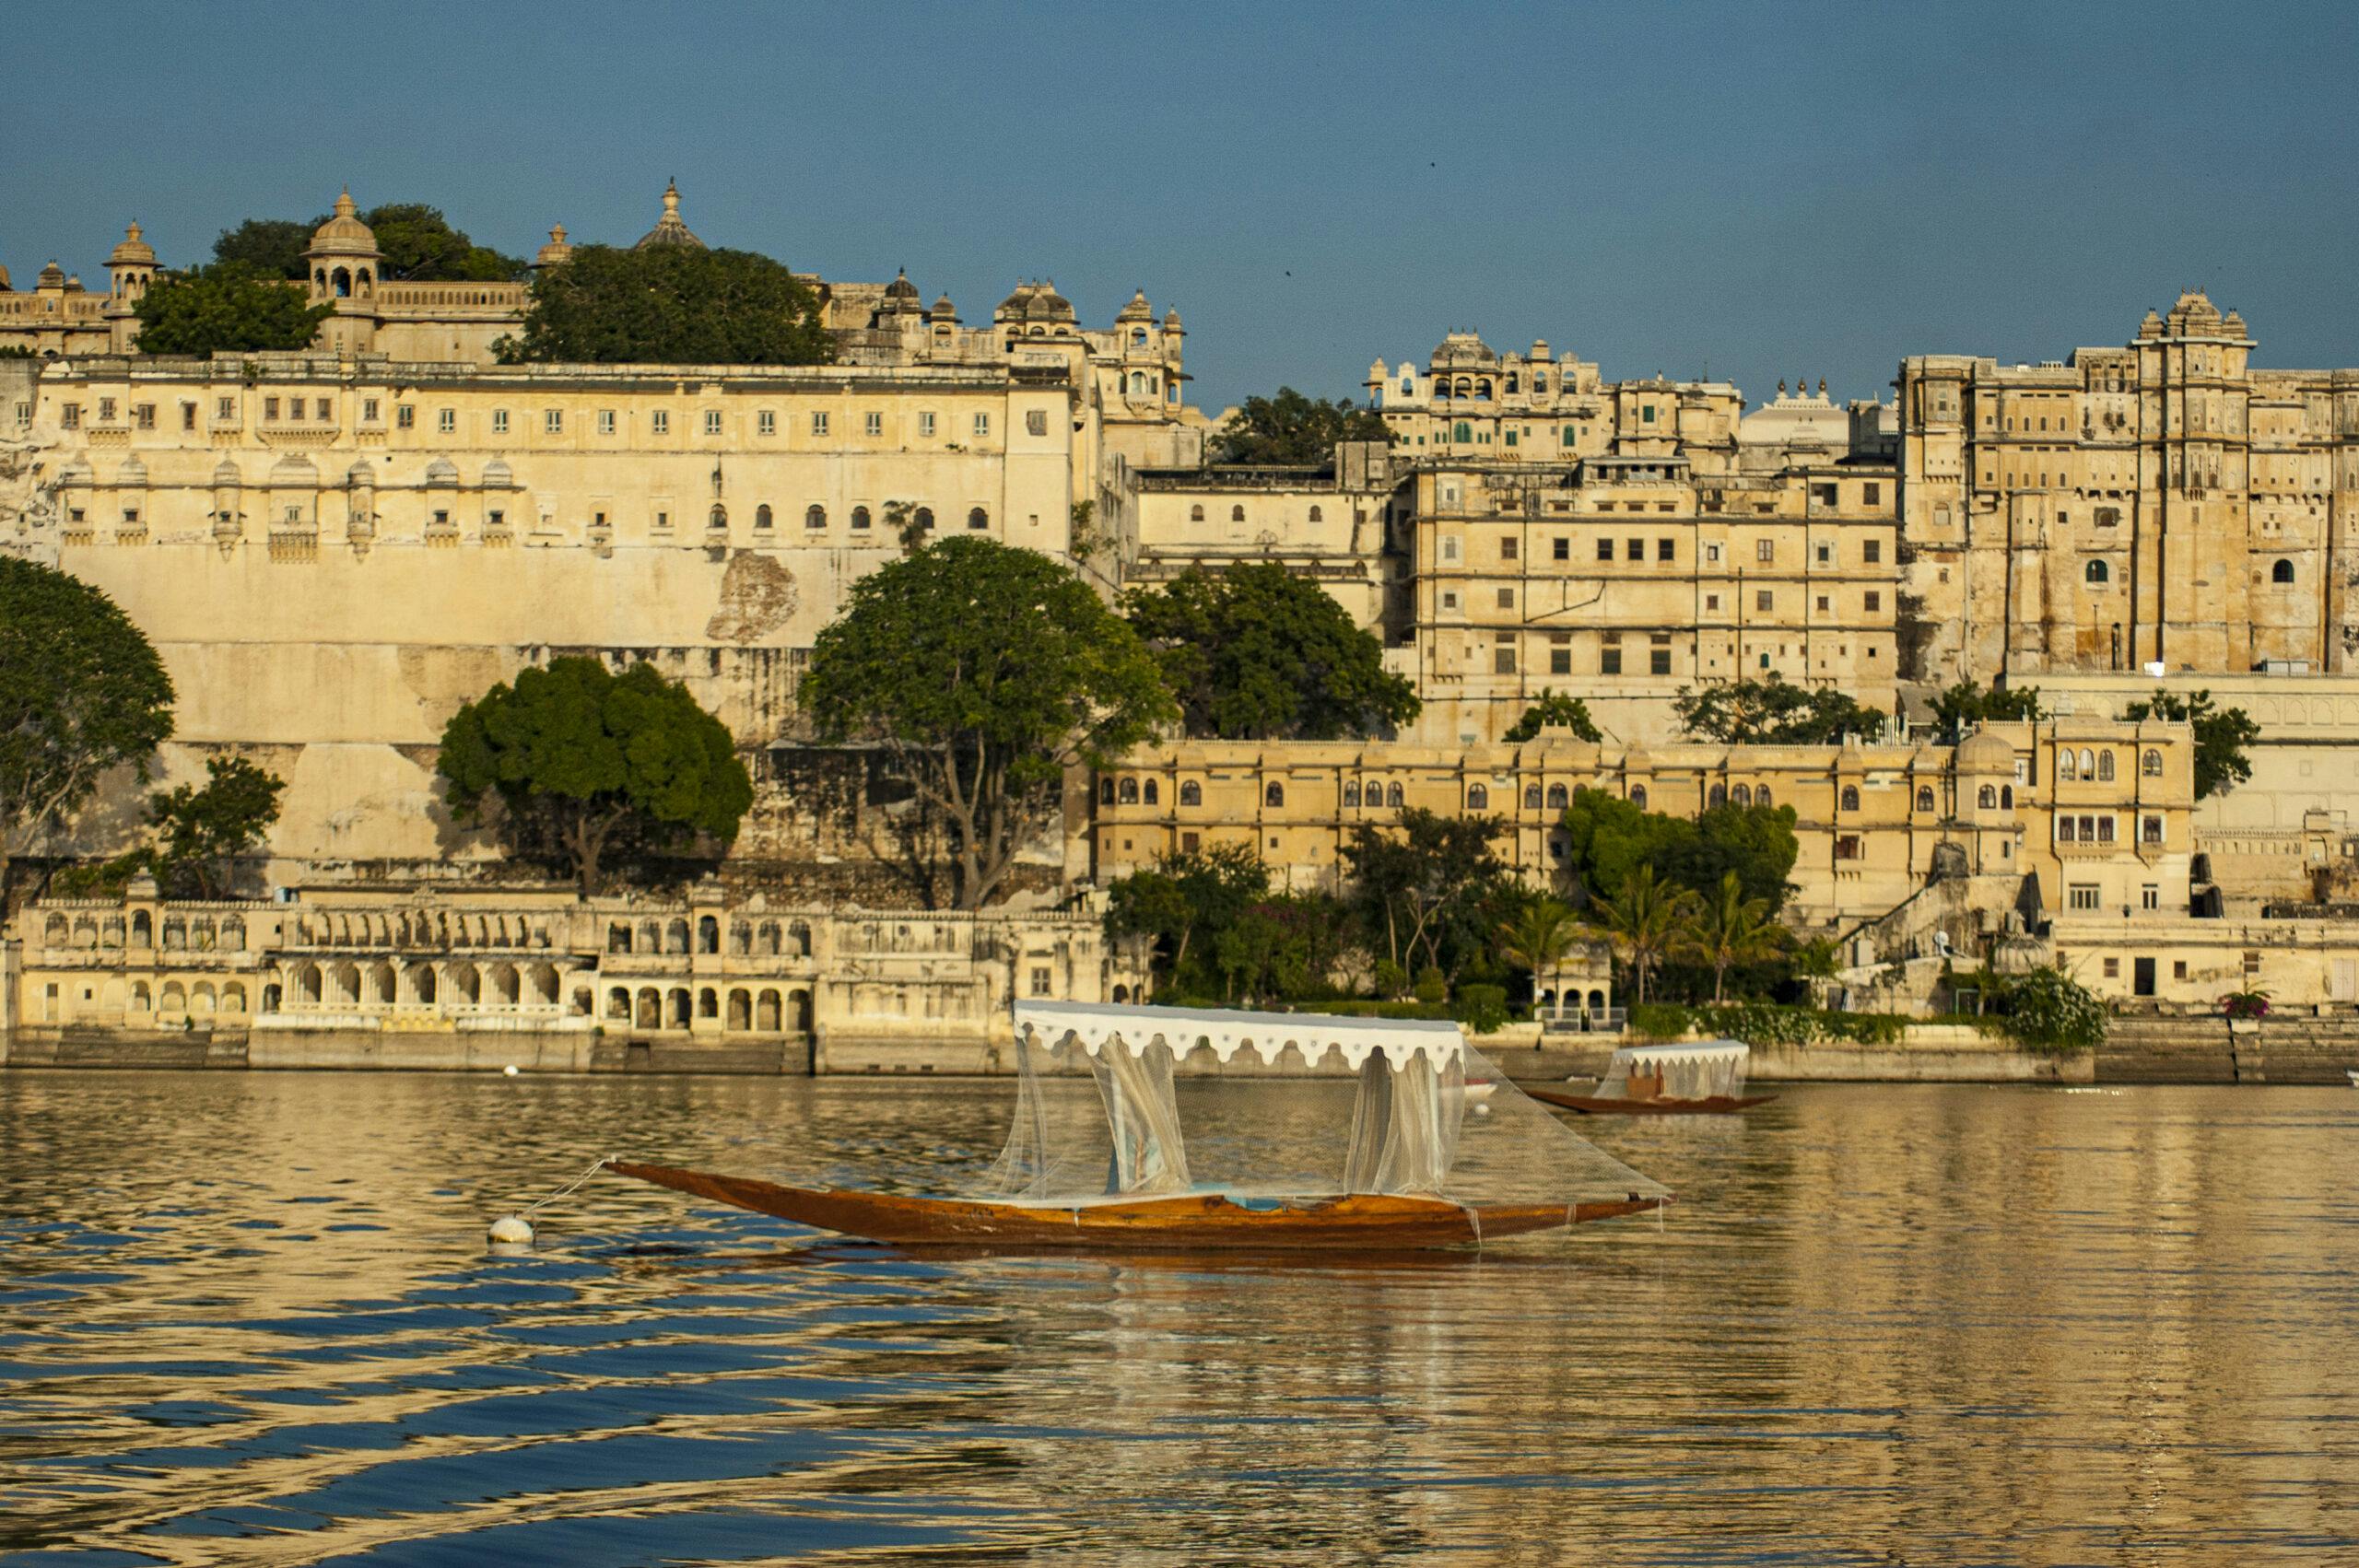 enjoy a cruise in Udaipur during your visit to India - a must-do! in Asia